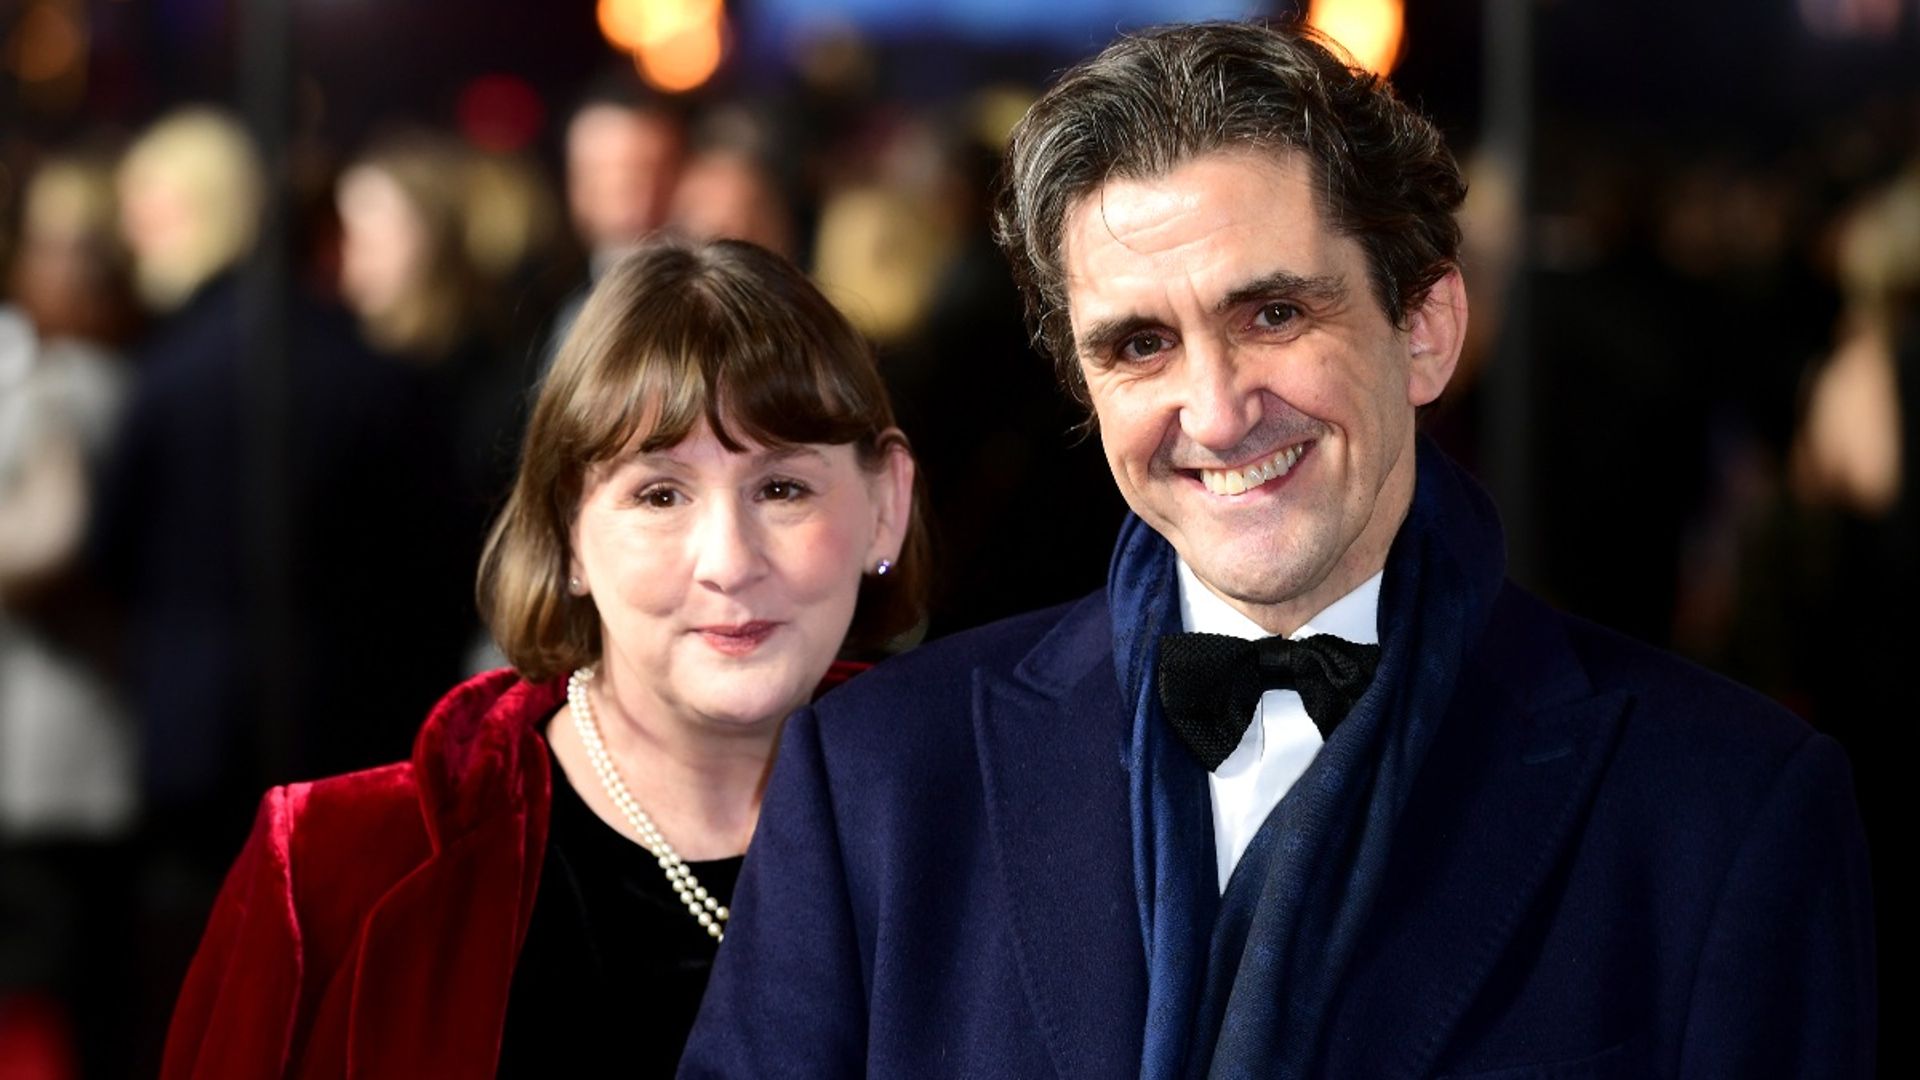 Call the Midwife star reveals what it's really like working with his wife on the show